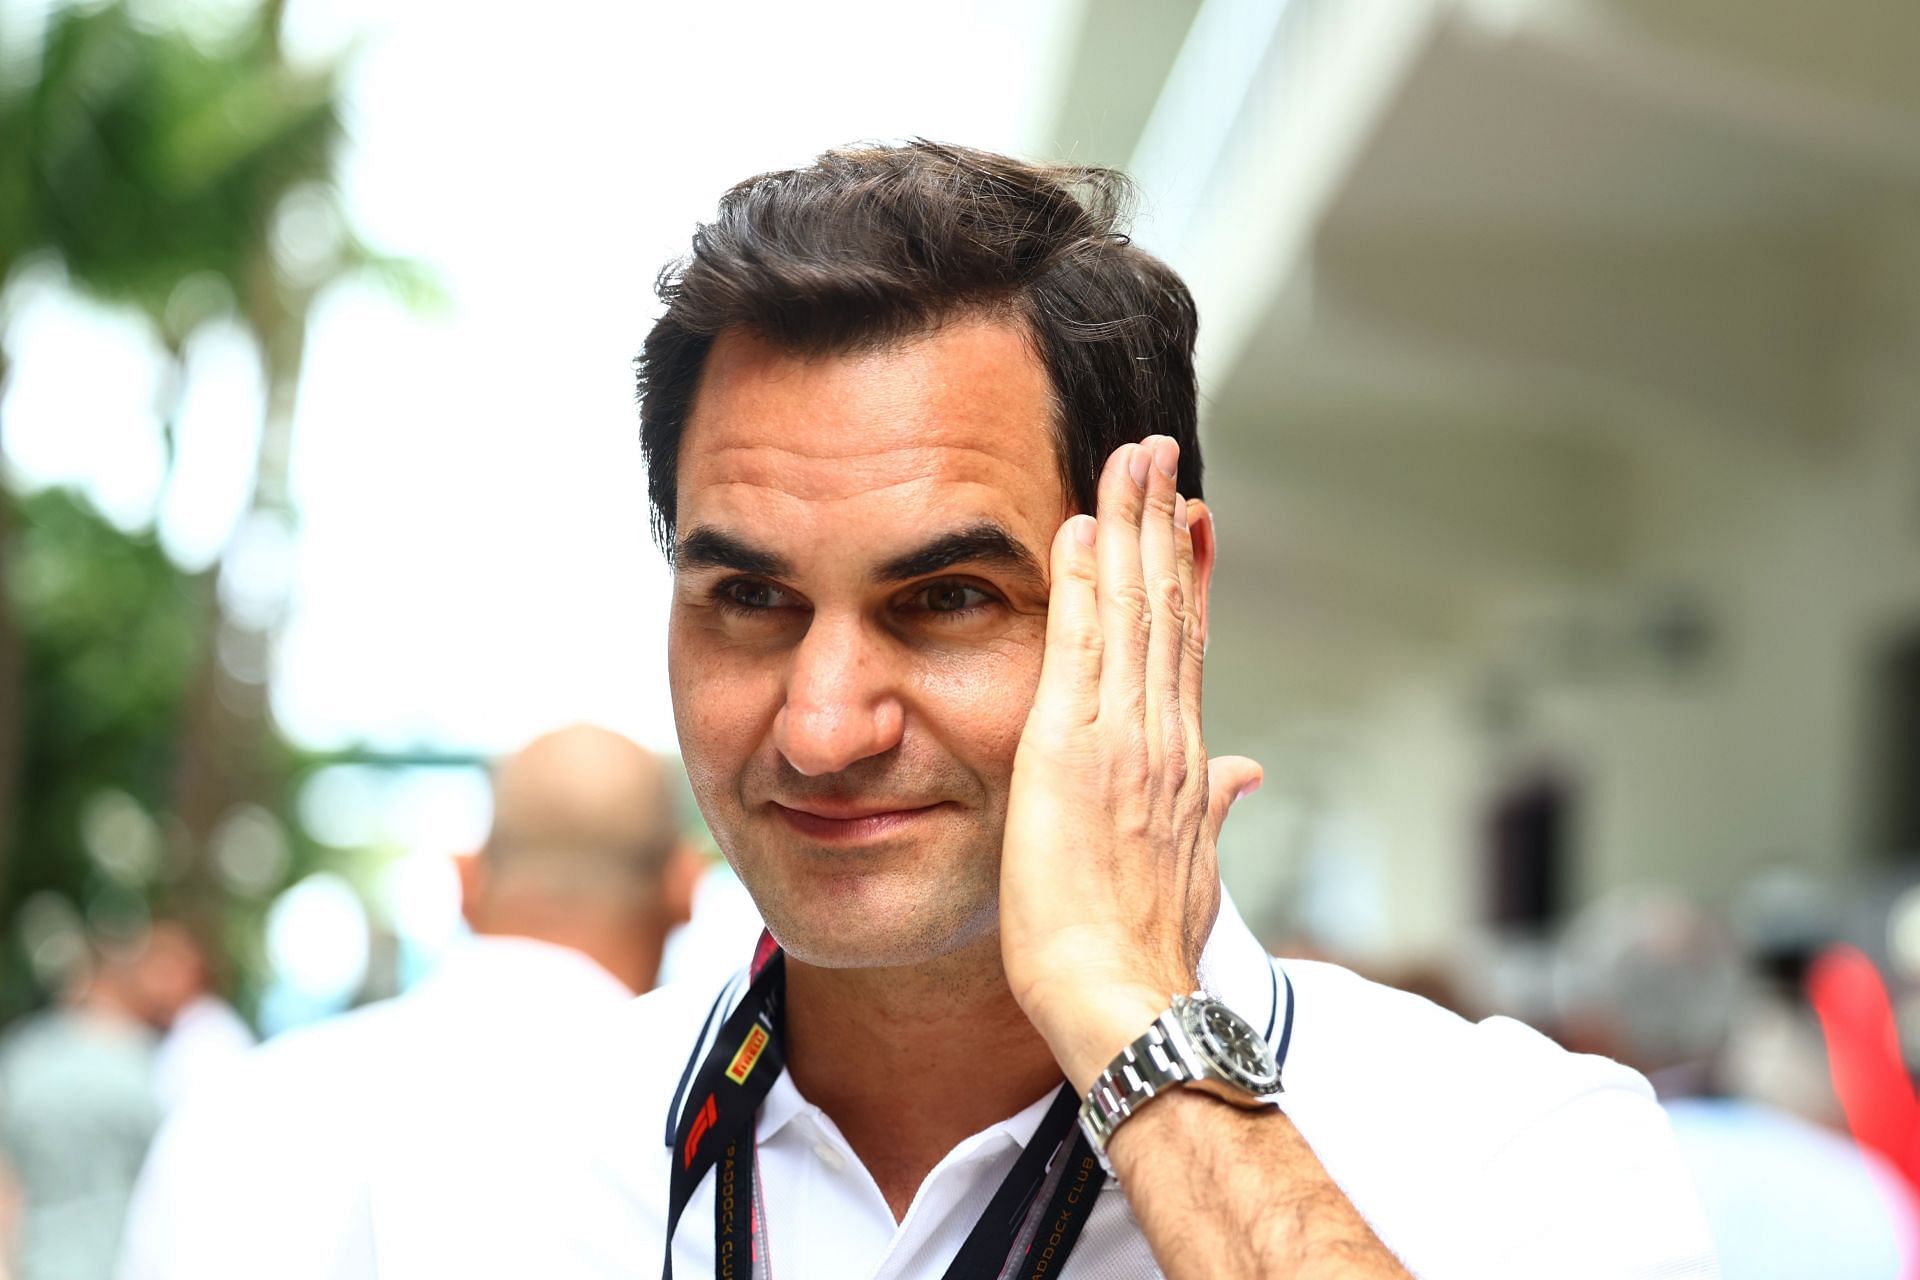 Roger Federer pictured at the F1 Grand Prix of Miami.